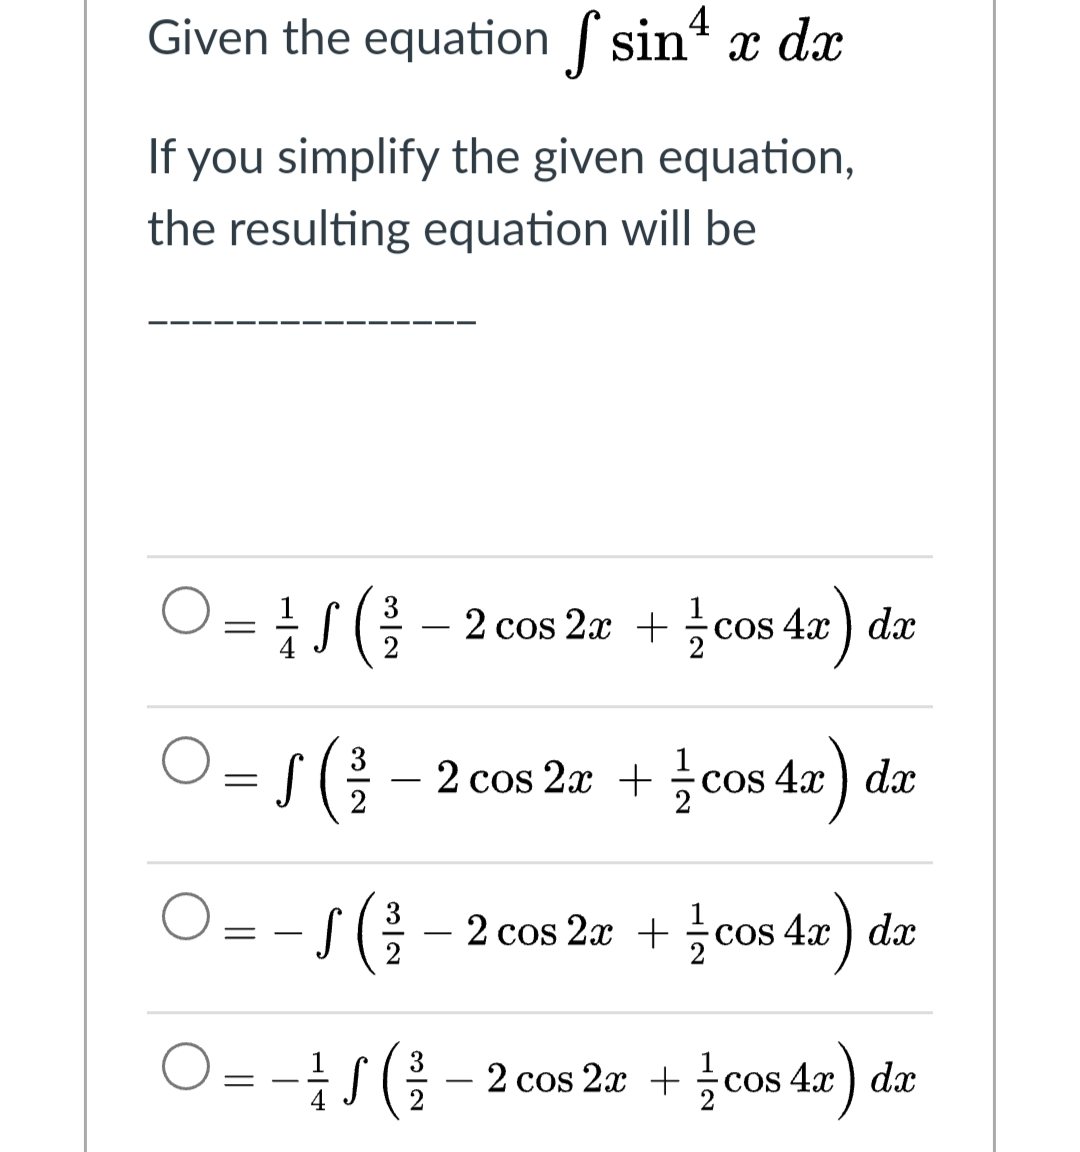 Given the equation f sin x dx
If you simplify the given equation,
the resulting equation will be
O= 5 ( - 2 cos 2x + cos 4a) da
COS
- 2 cos 2x + cos 4x ) dx
)
COS
|
2
O = -S(
-- 2 cos 2æ + cos 4x ) dx
O= -S( - 2 cos 2æ + ¿cos 4x) dæ
3
cos 4x ) dx
%3D
